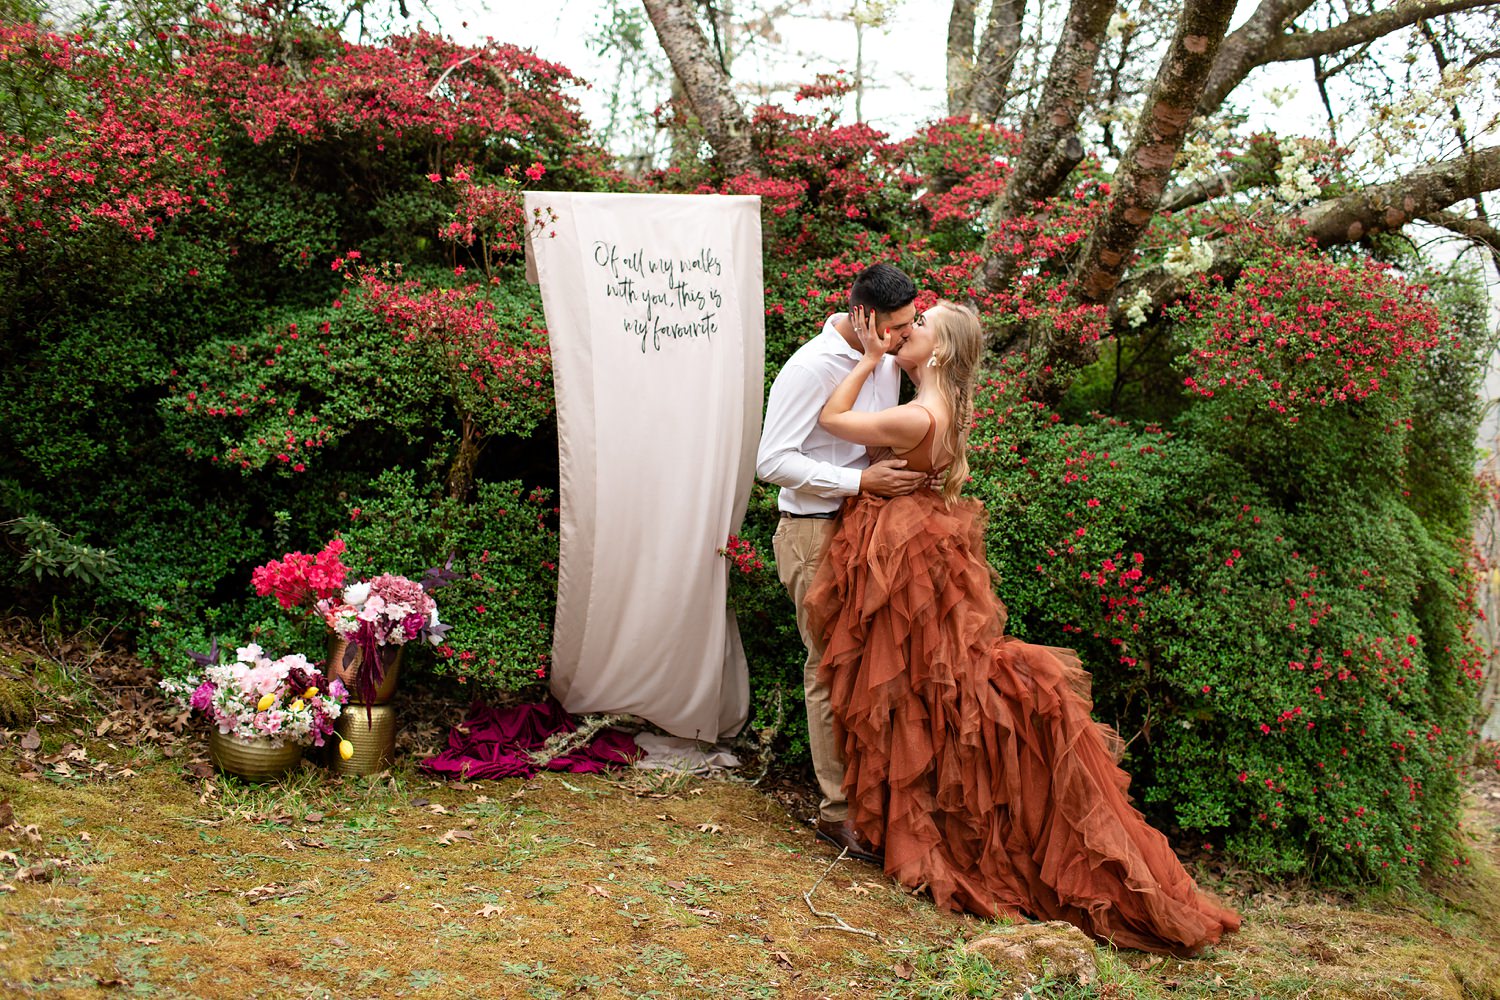 Bride, in a burnt orange wedding dress by Silver Swallow, and Groom kiss at the end of the ceremony in fornt of a DIY banner and azalea flowers at their elopement in Magoebaskloof, South Africa.